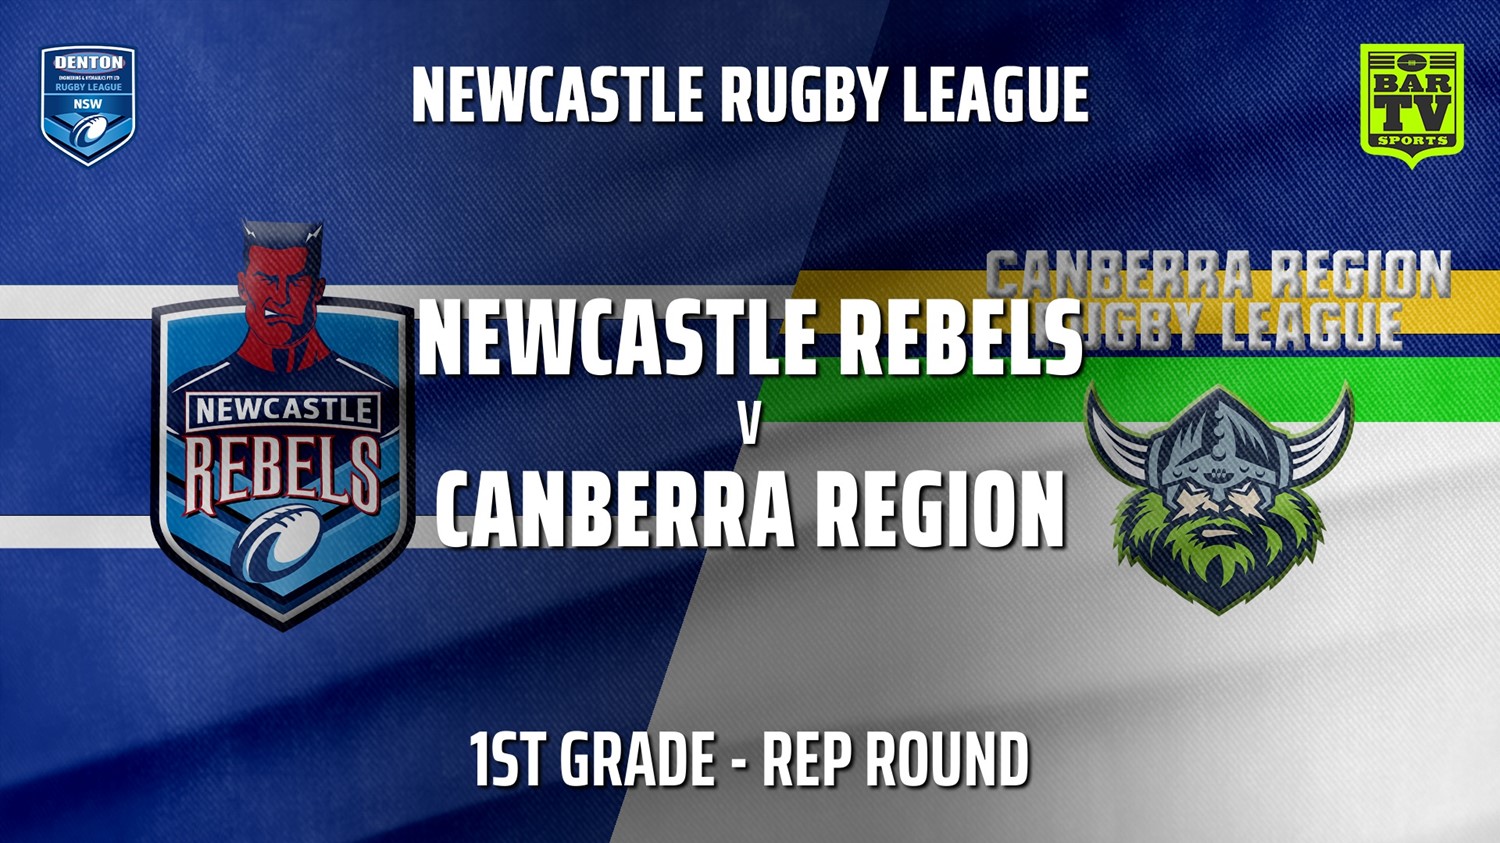 210626-Newcastle Rep Round - 1st Grade - Newcastle Rebels v Canberra Region Rugby League Minigame Slate Image